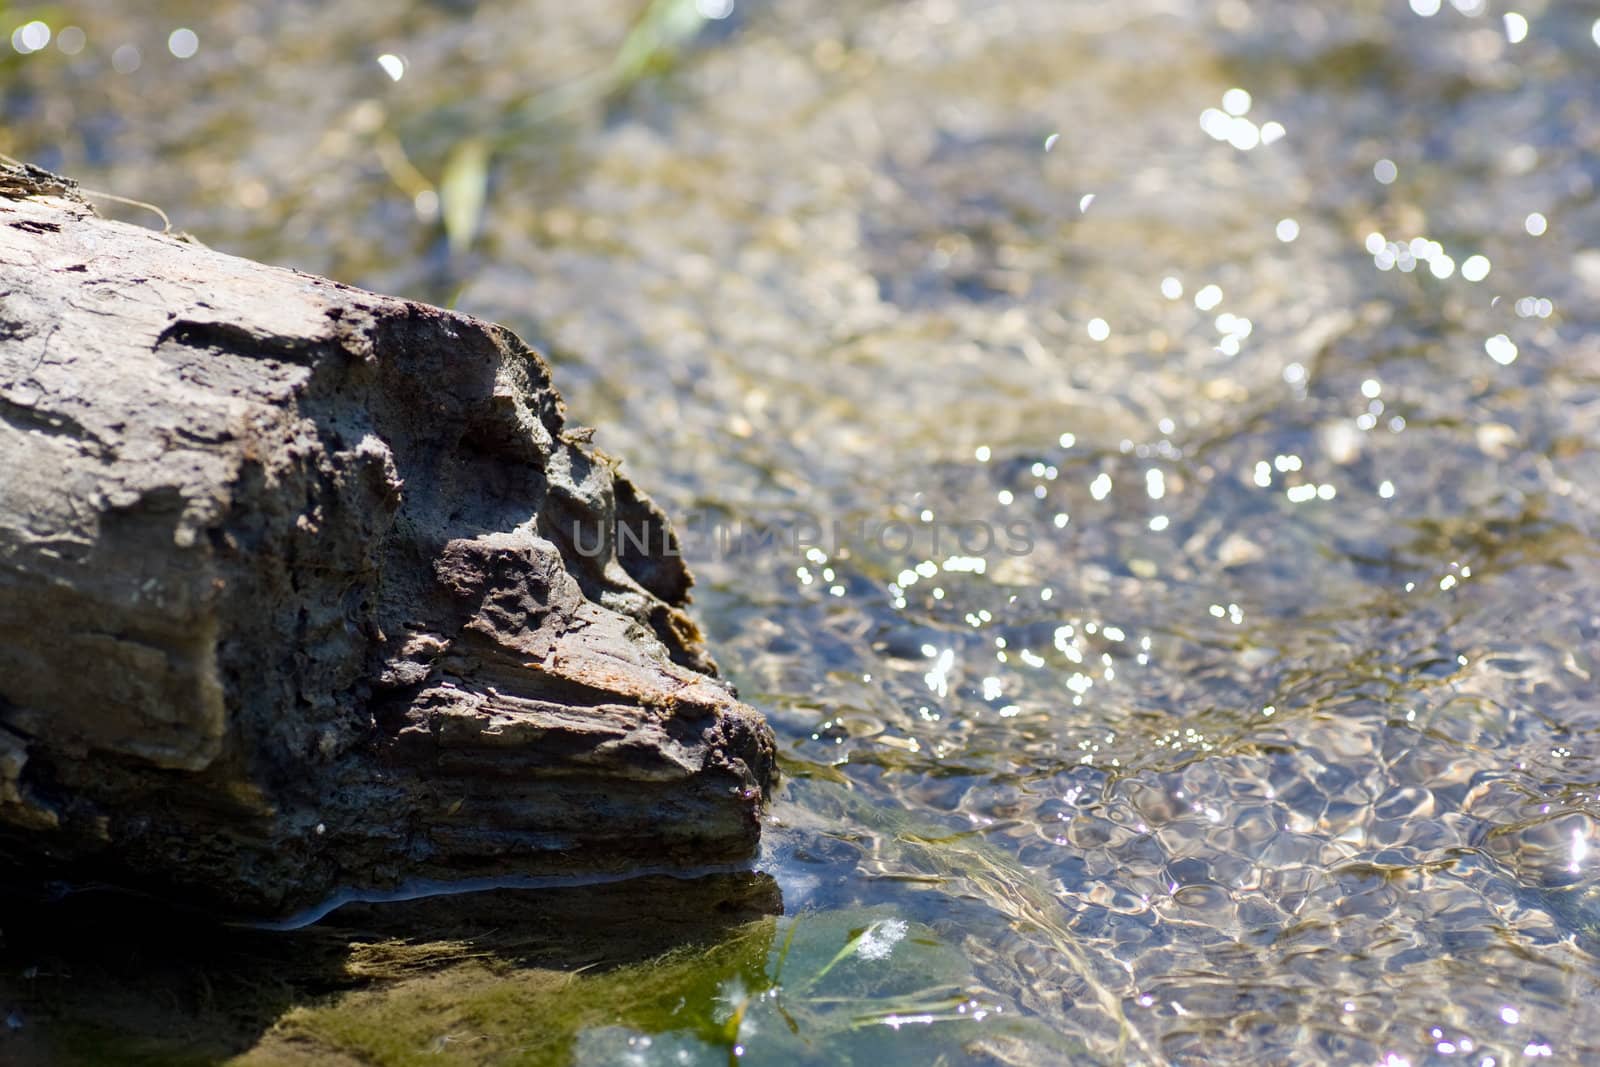 Running water from a stream, moving past a tree stump.